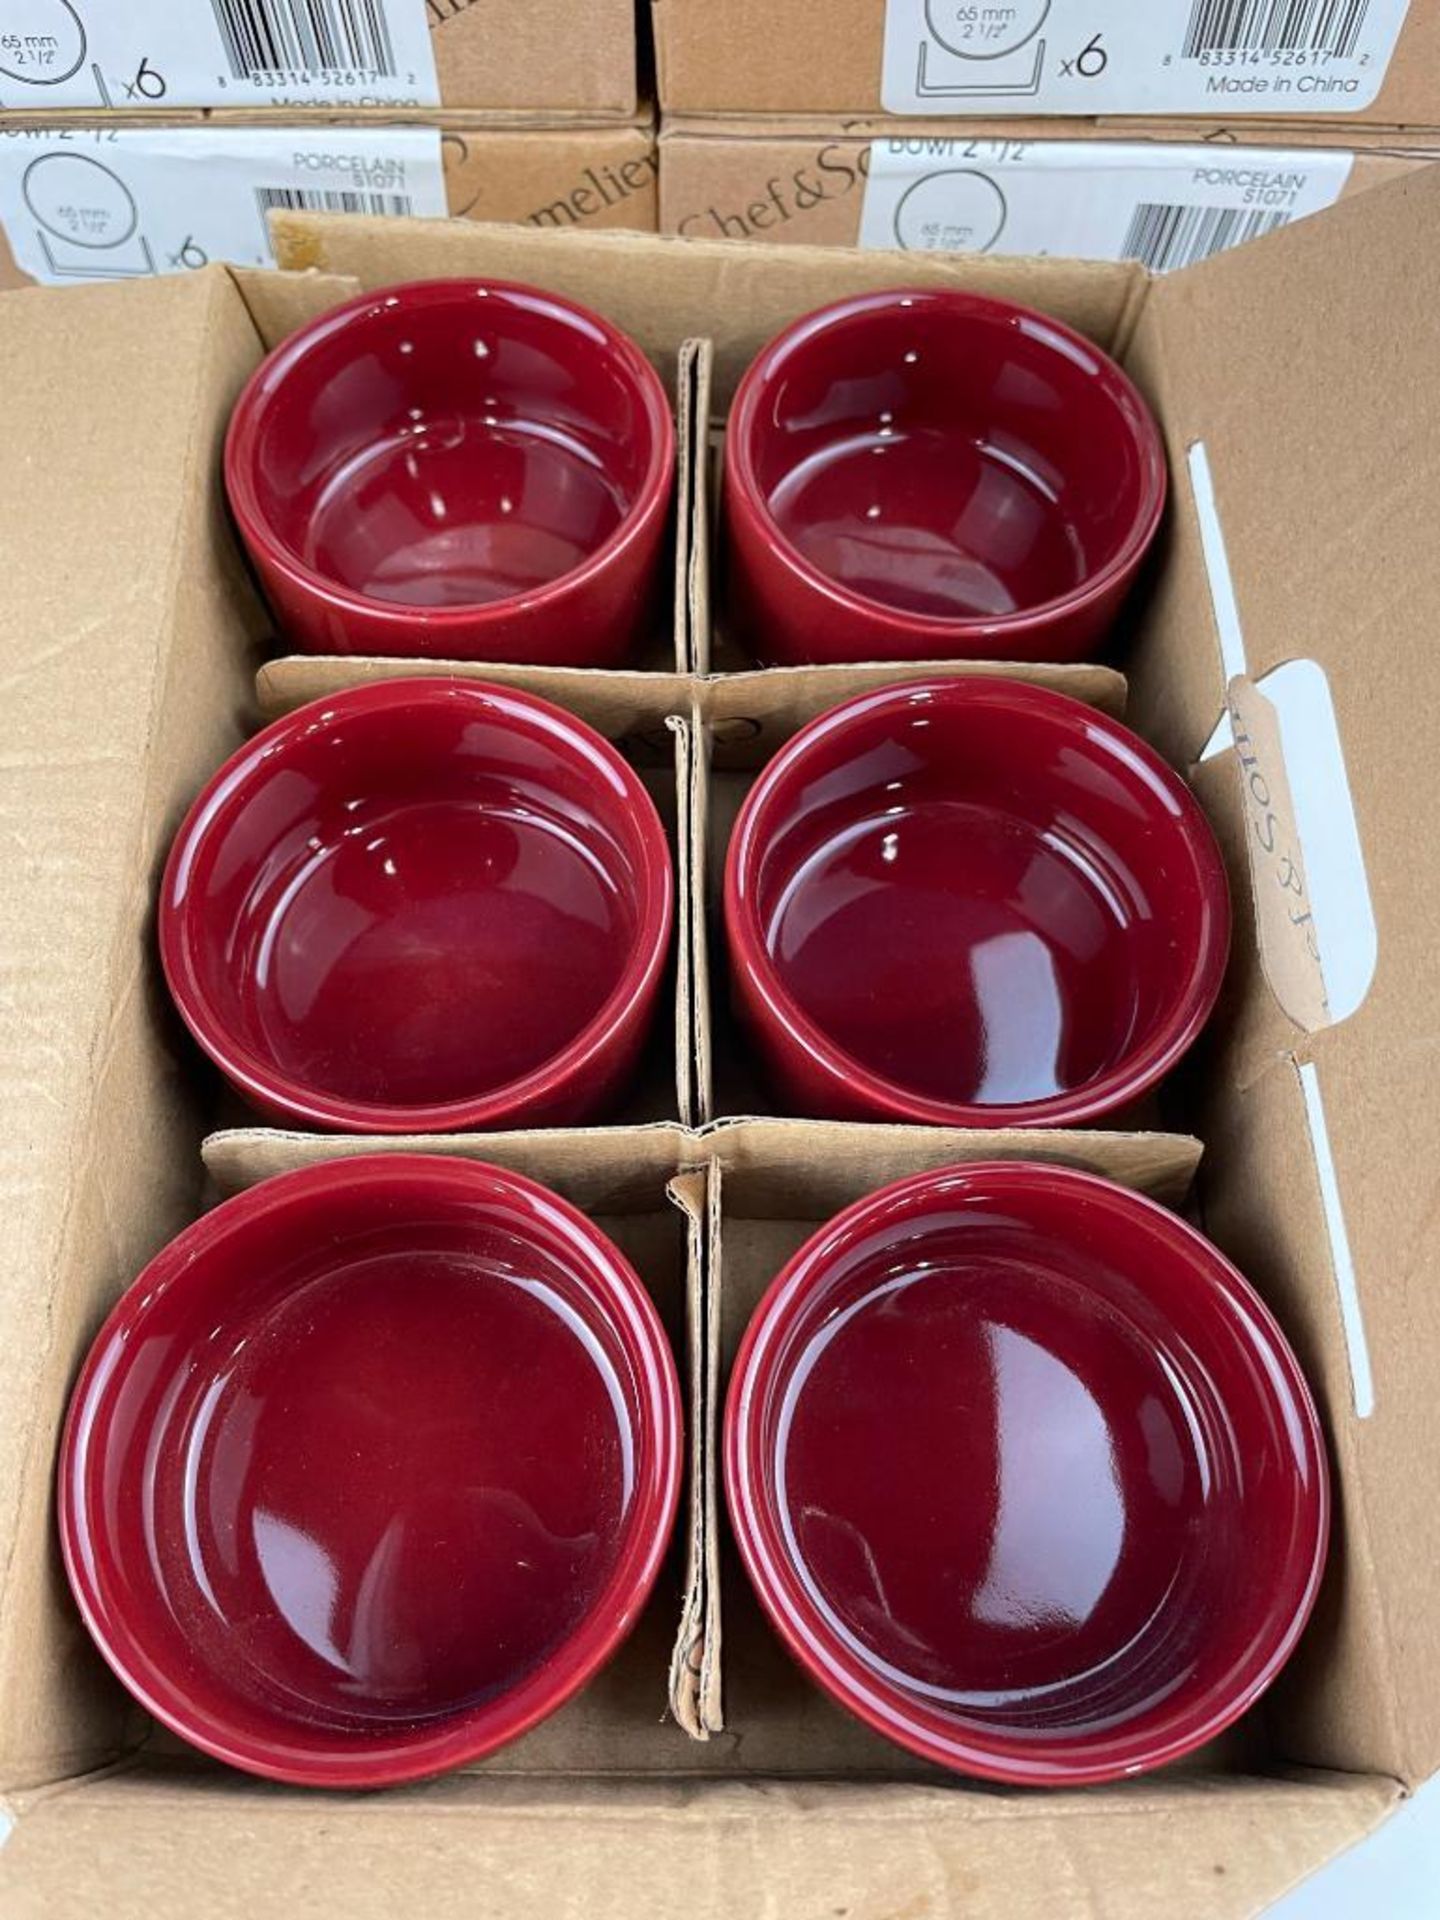 2 CASES OF CHEF & SOMMELIER PURITY 2 OZ. RED CIRCULAR BOWLS, 24/CASE - NEW - Image 3 of 5